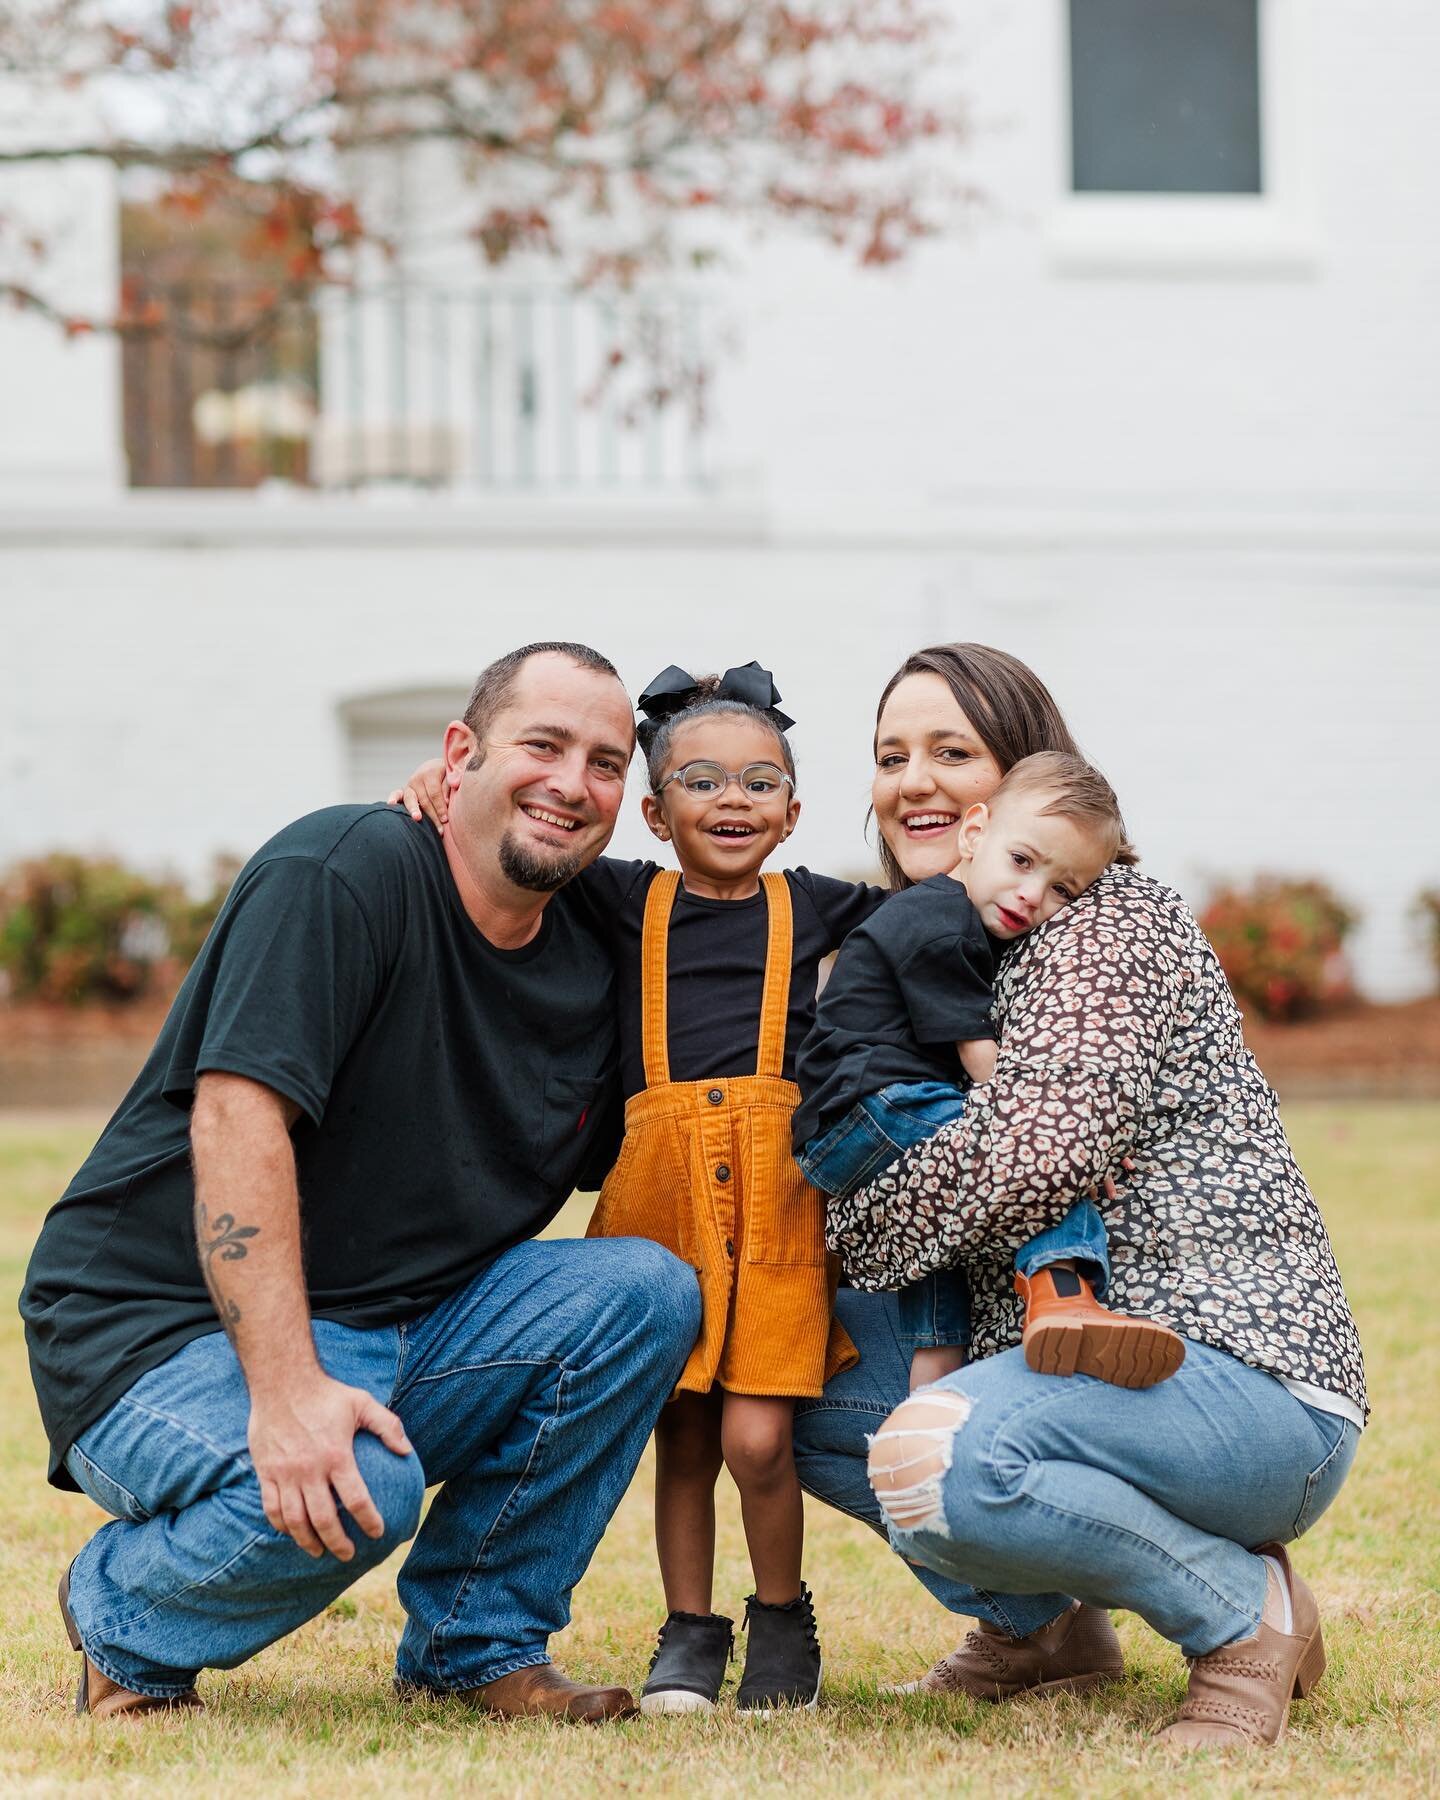 Such a beautiful family with such a beautiful story! Loved every minute of this Photoshoot! Running in the rain with littles and meeting new people is simply the best! Here are a few sneak peeks from this sweet session! More to come soon!! ❤️